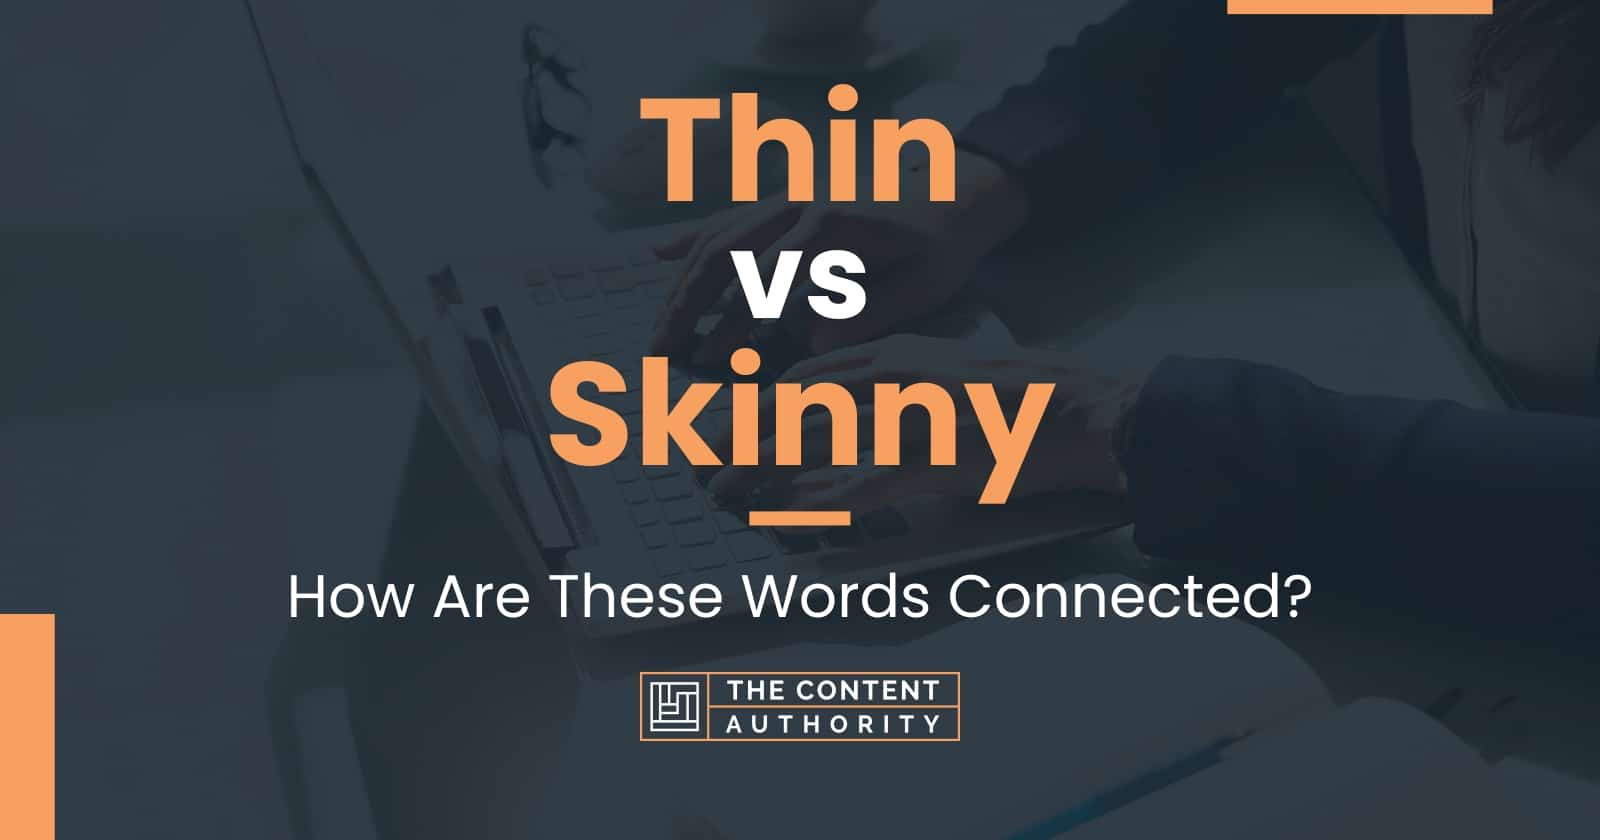 Thin vs Skinny: How Are These Words Connected?